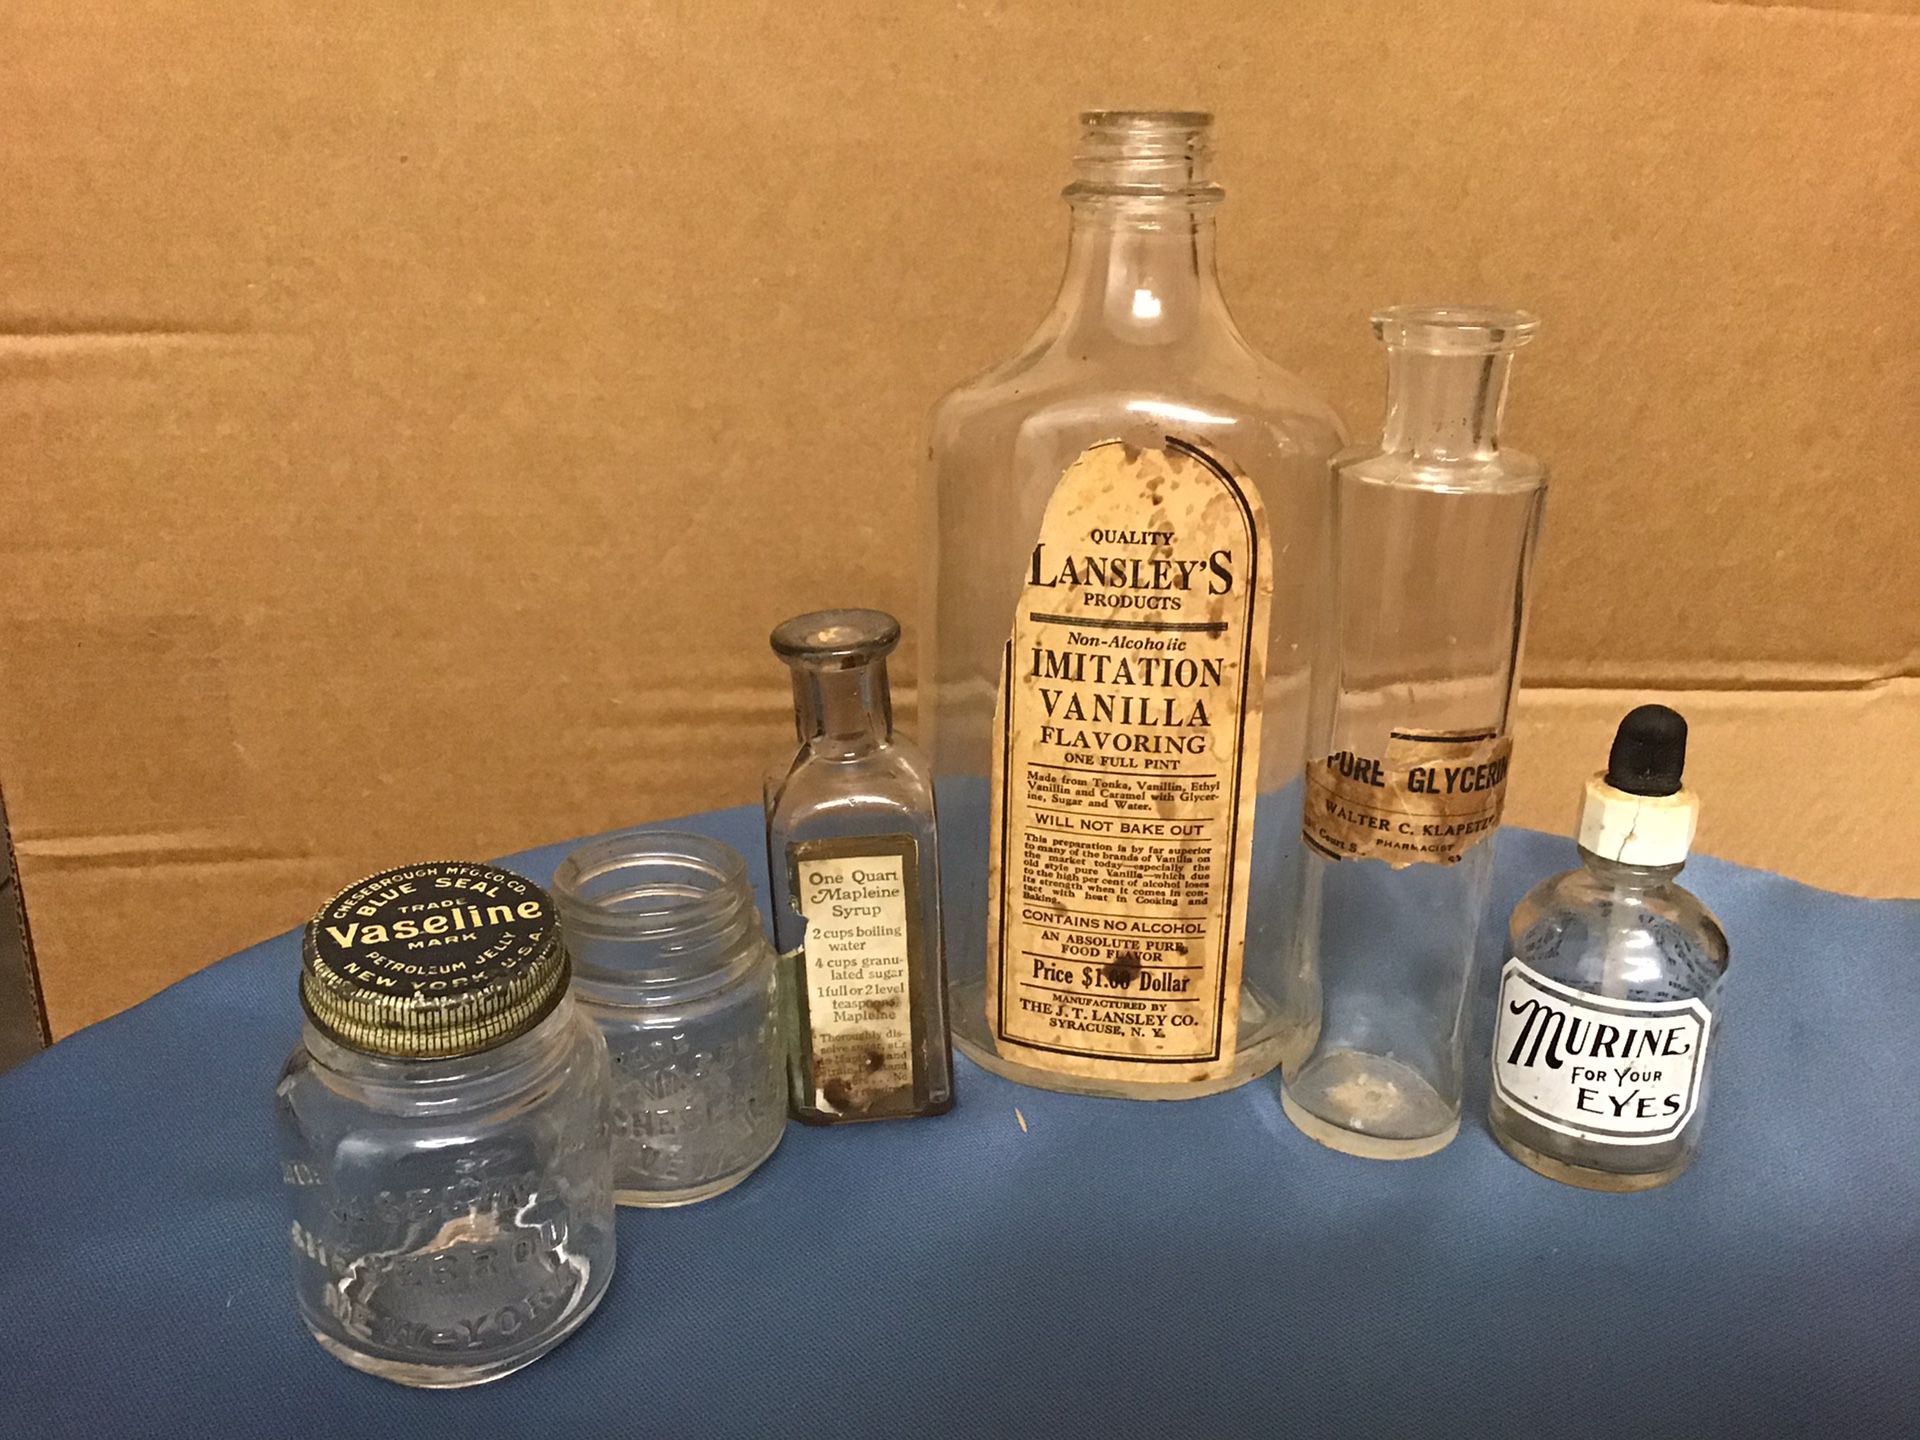 Vintage bottles/jars. All came from my family estate in Syracuse, NY